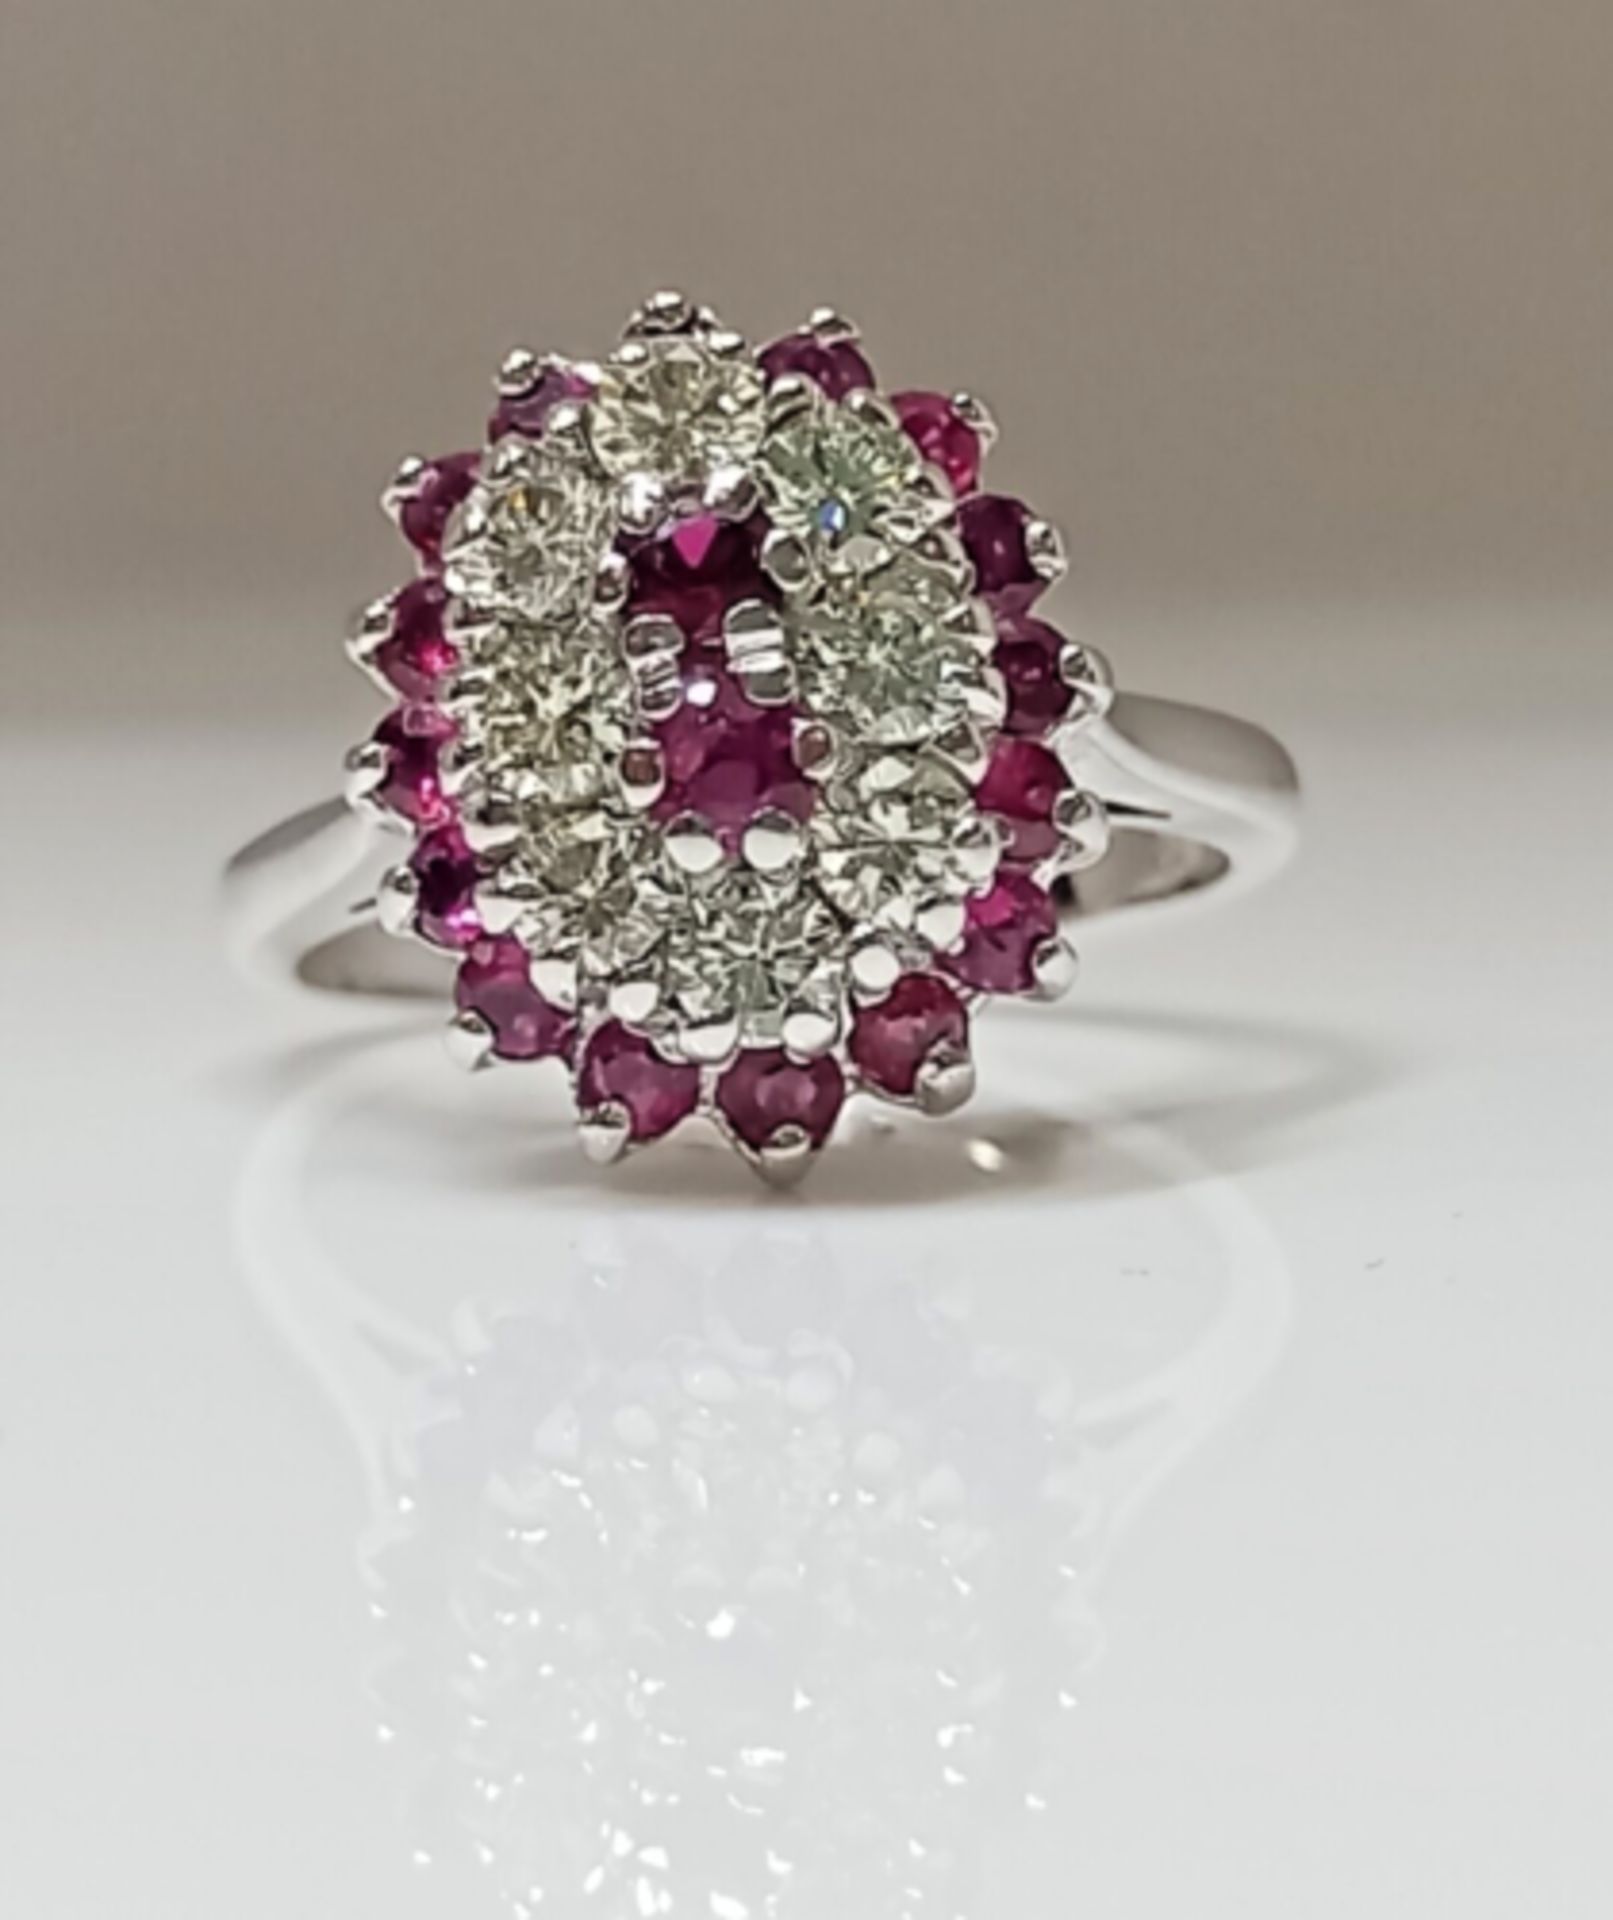 RUBY & 0.55CT DIAMOND CLUSTER RING 18CT WHITE GOLD + GIFT BOX + VALUATION CERTIFICATE OF £3500